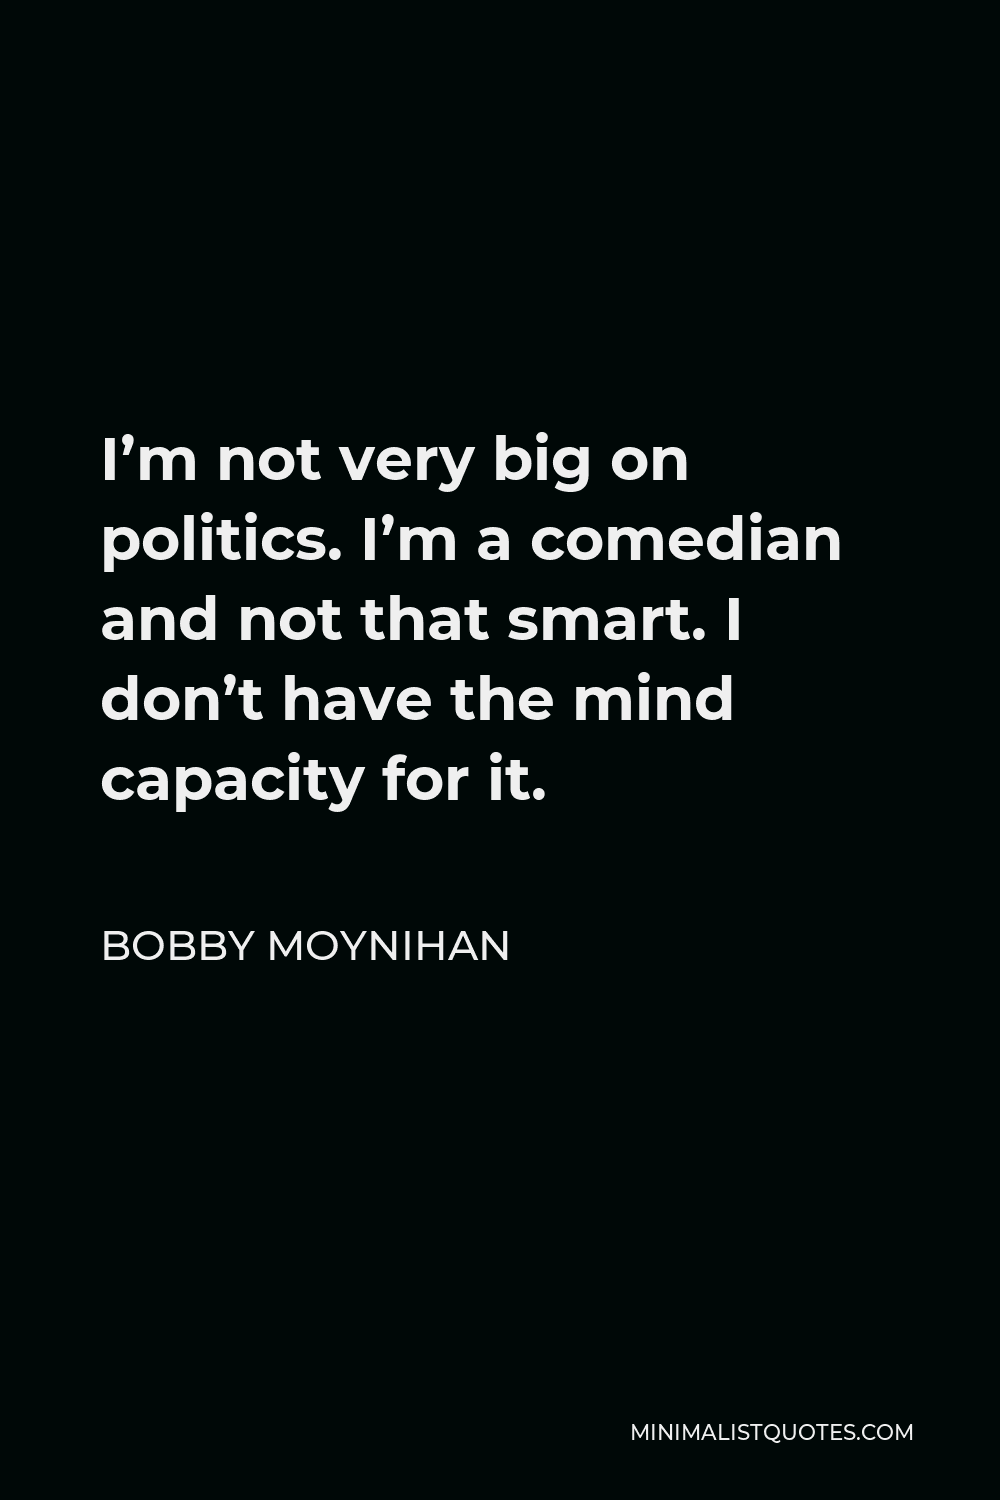 Bobby Moynihan Quote - I’m not very big on politics. I’m a comedian and not that smart. I don’t have the mind capacity for it.